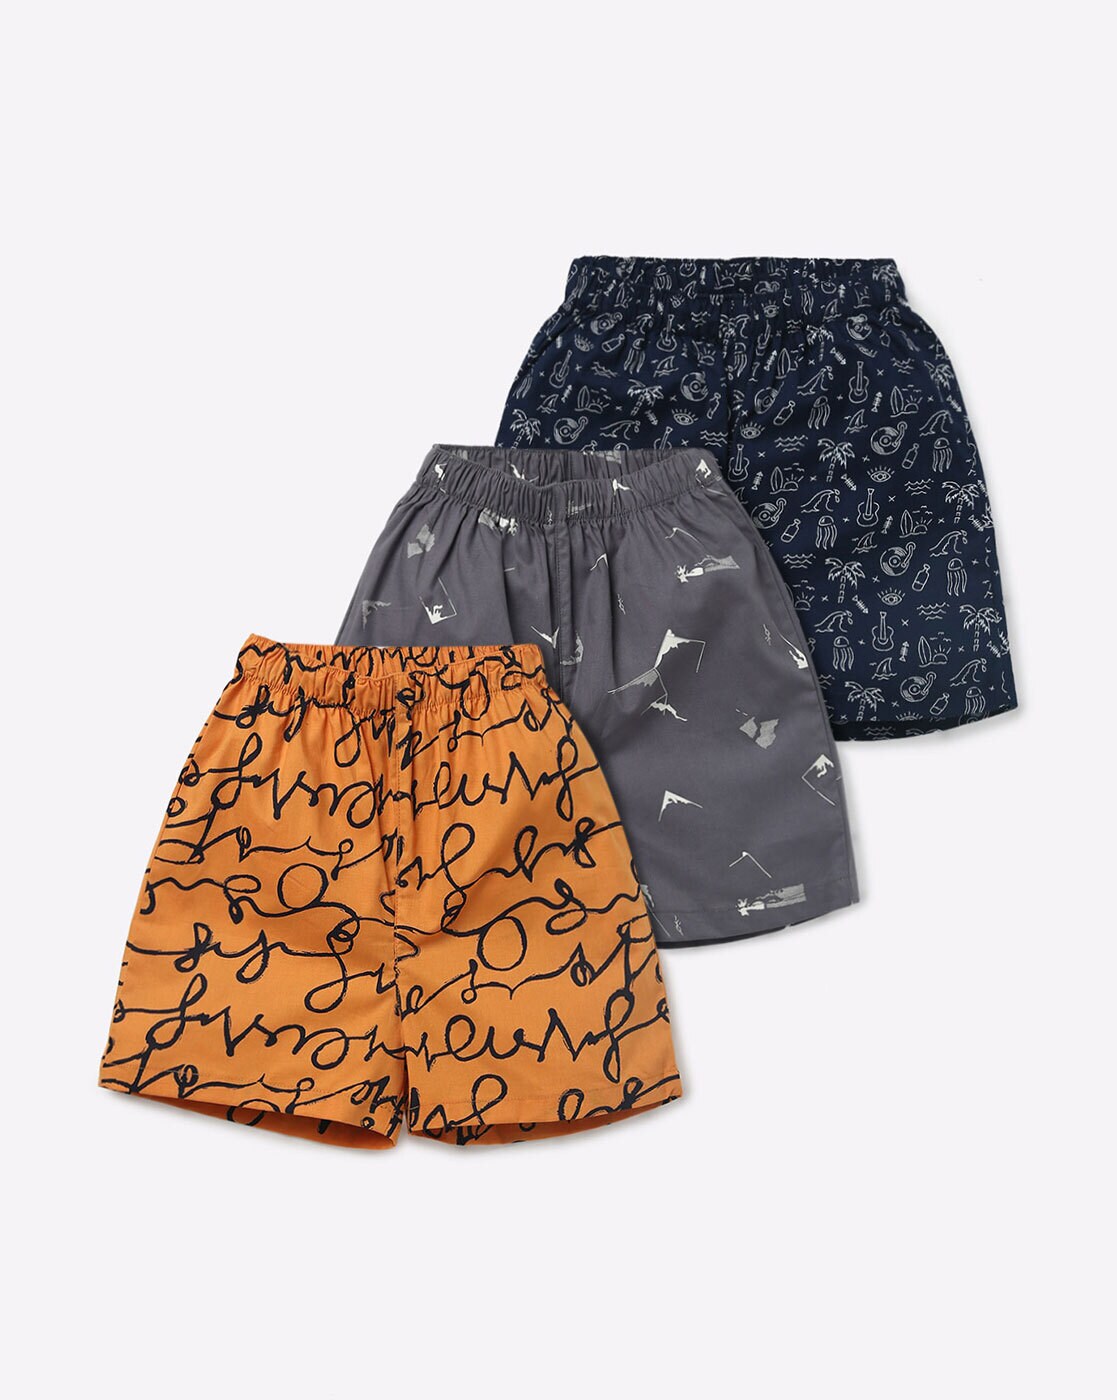 Buy Multicoloured Boxers for Boys by Urban Hug Online